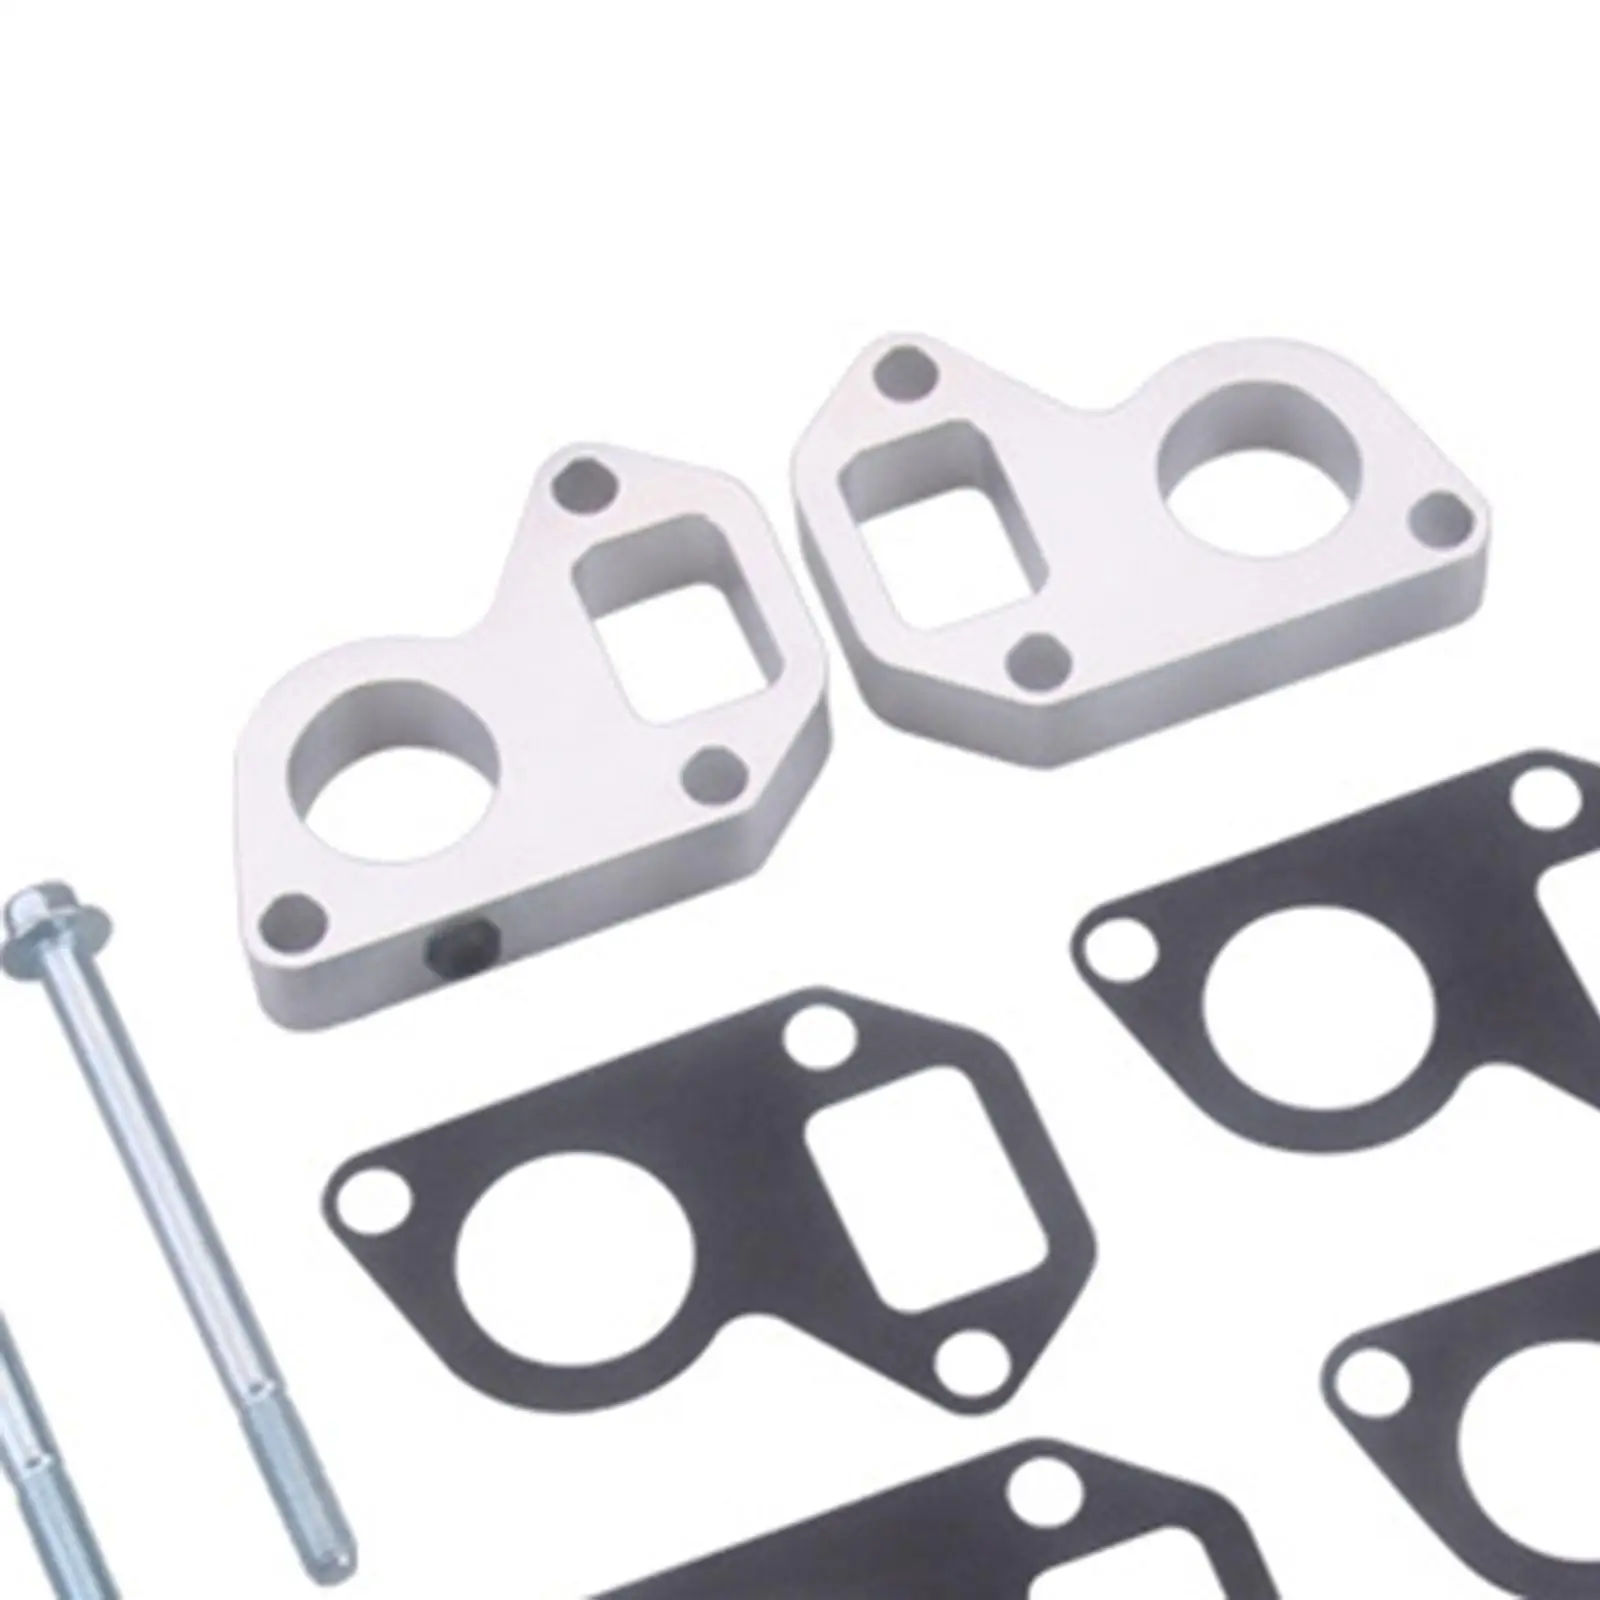 Water Pump Spacers Adapter Swap Set for LS1 to Truck for Accessories